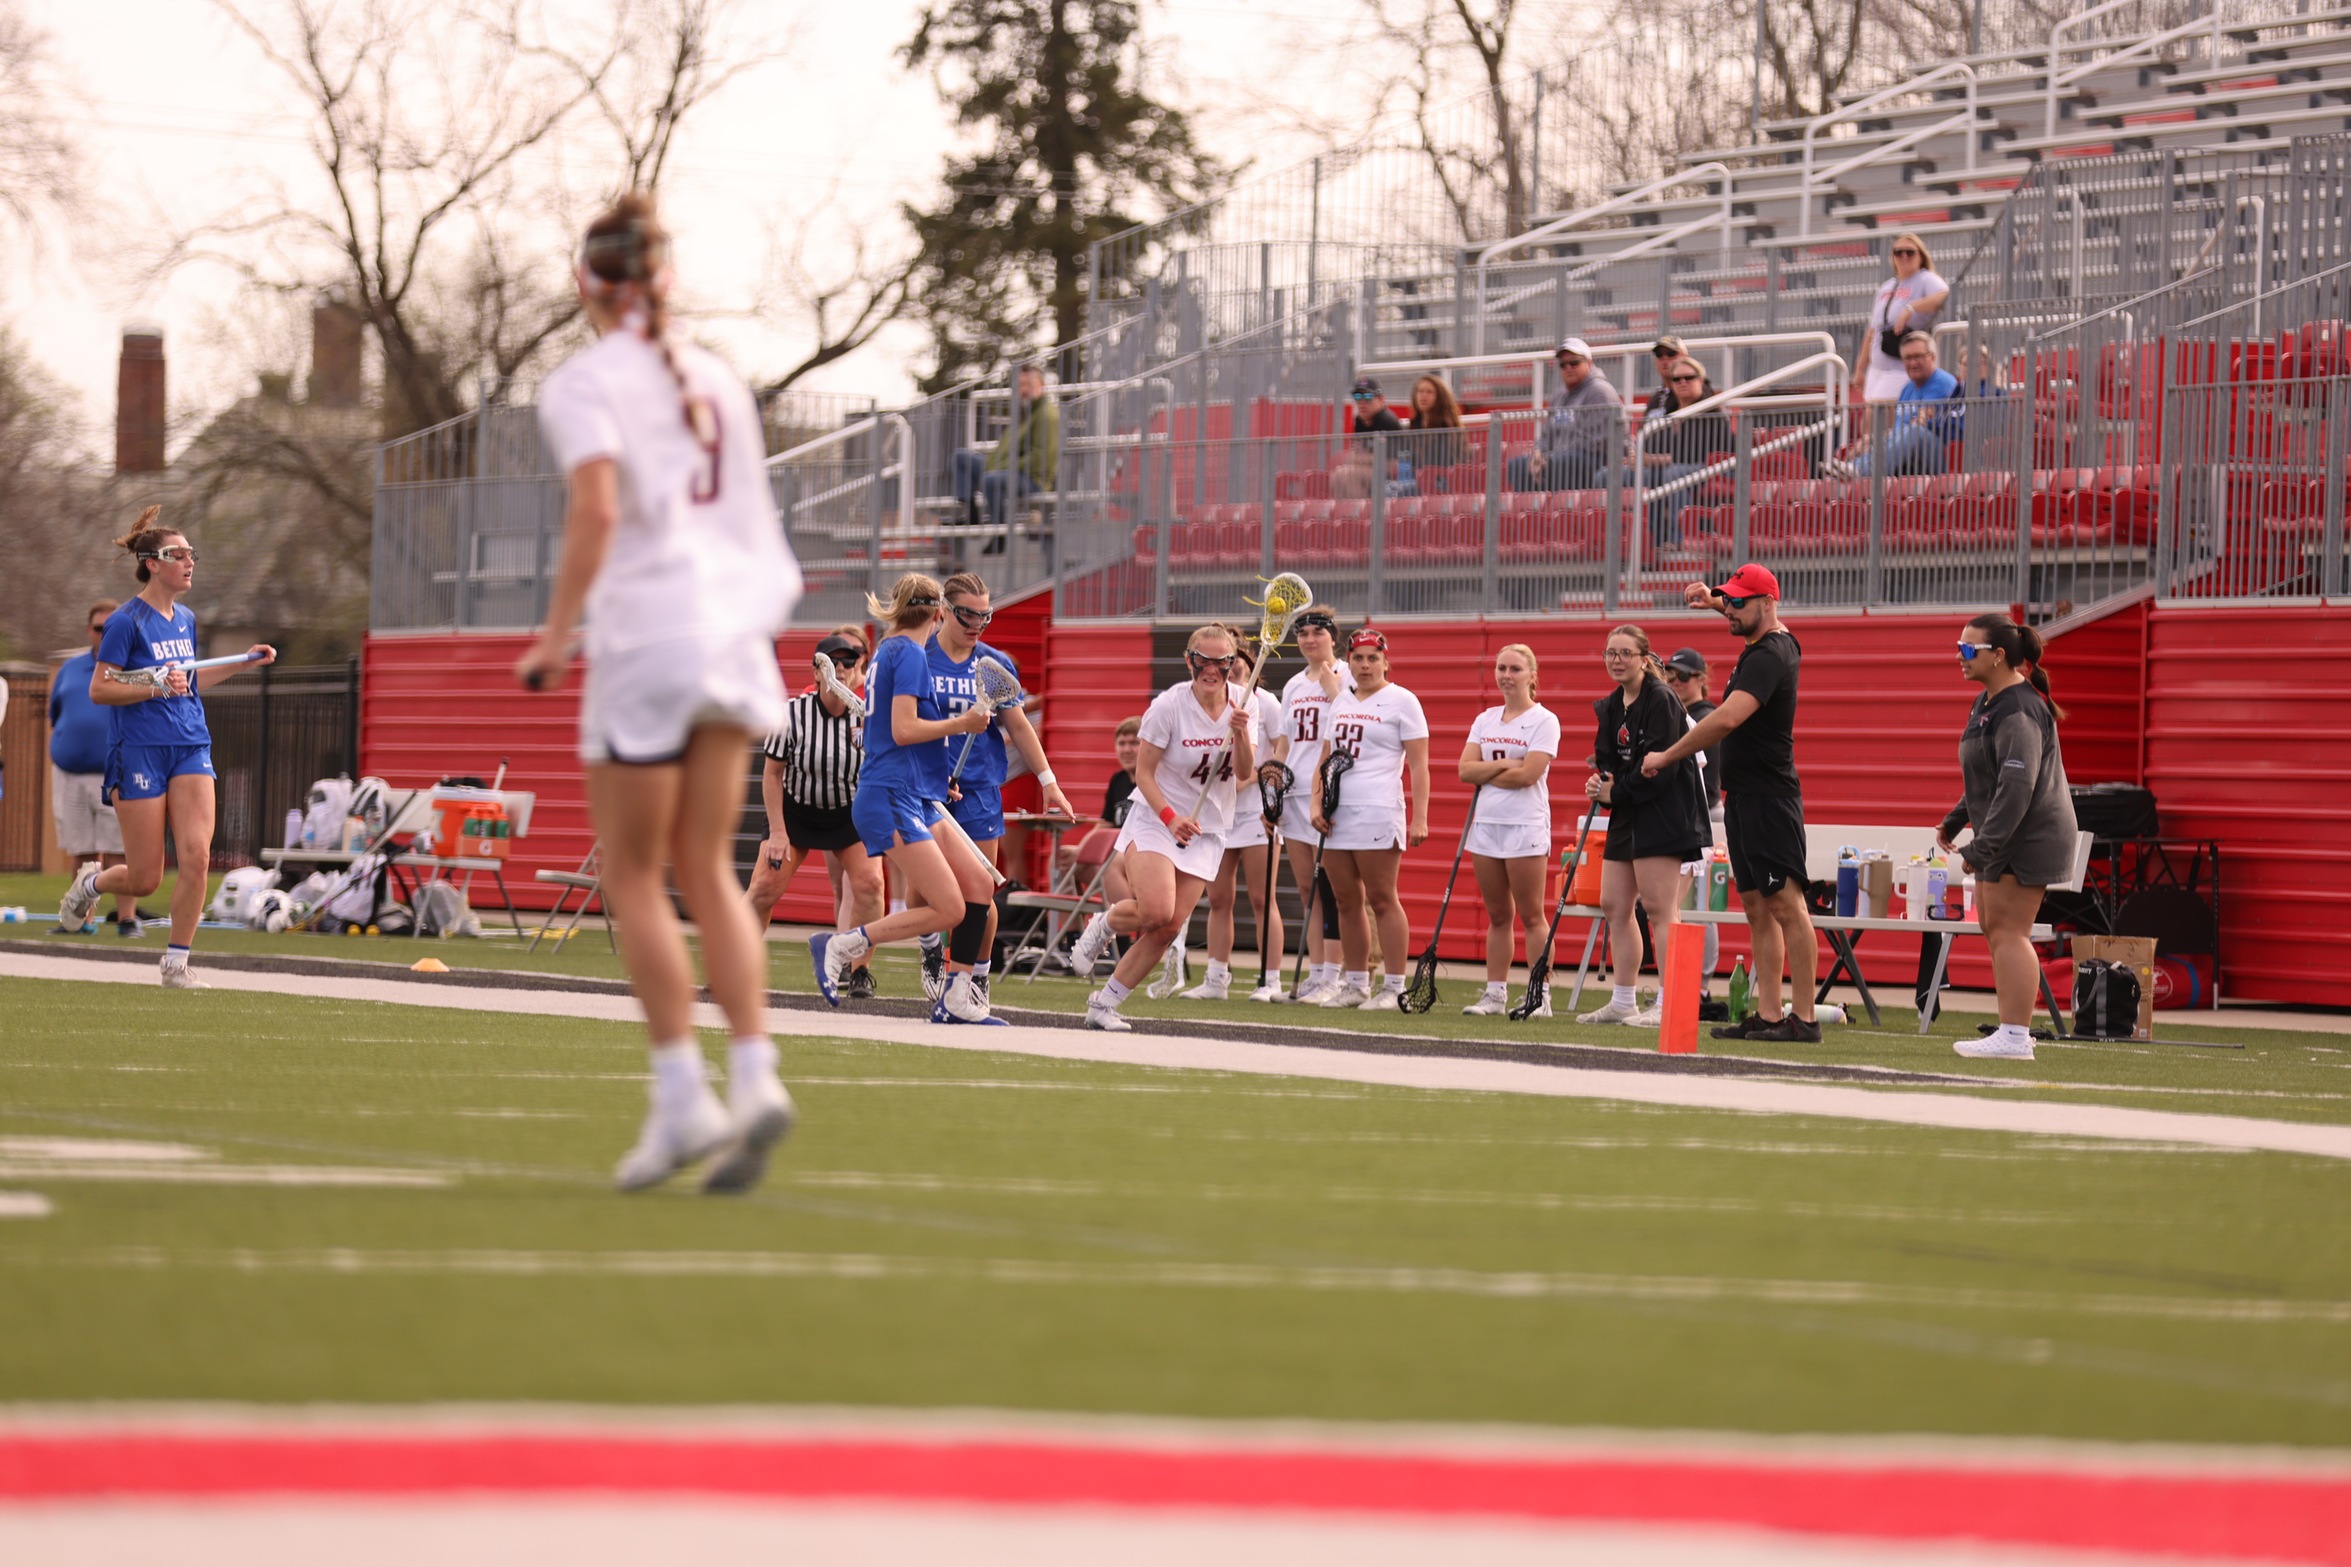 Women's Lacrosse comes up short in overtime against Bethel in WHAC First Round